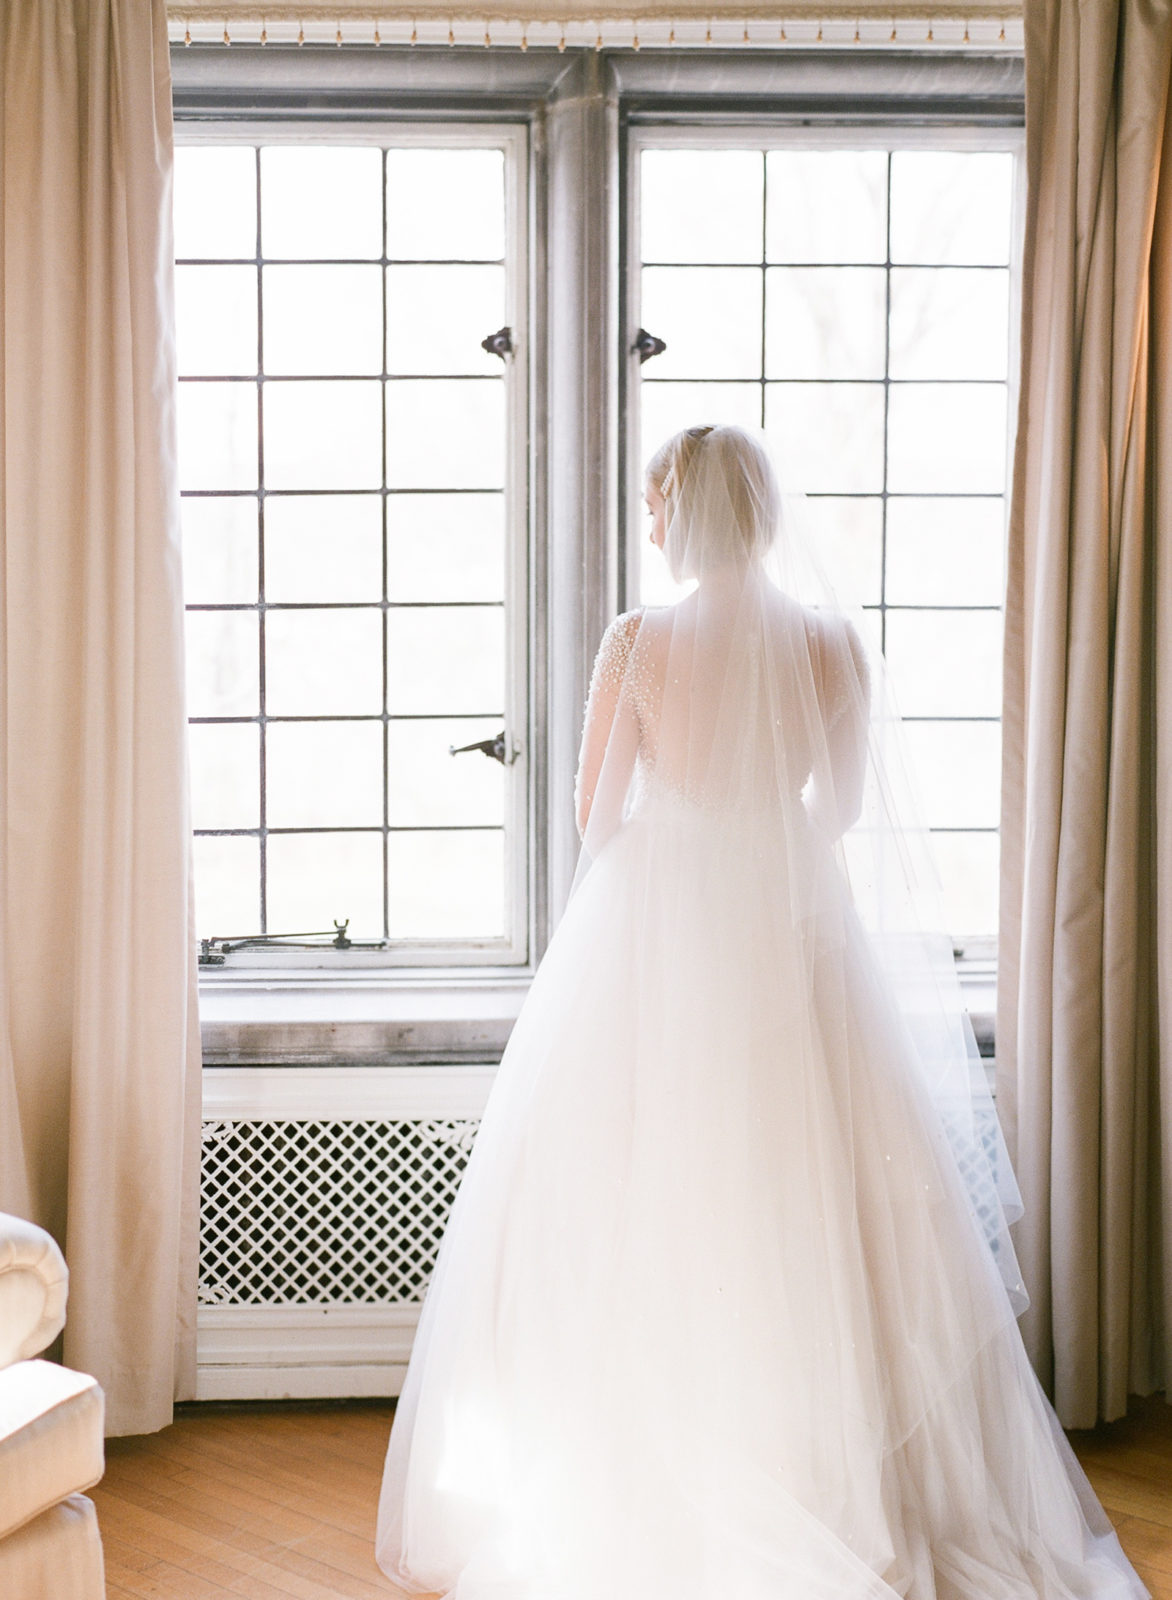 Laurel Hall Wedding Photographer | Estate Wedding Venue | Midwest Film Photographer | Molly Carr Photography | Bride by Window